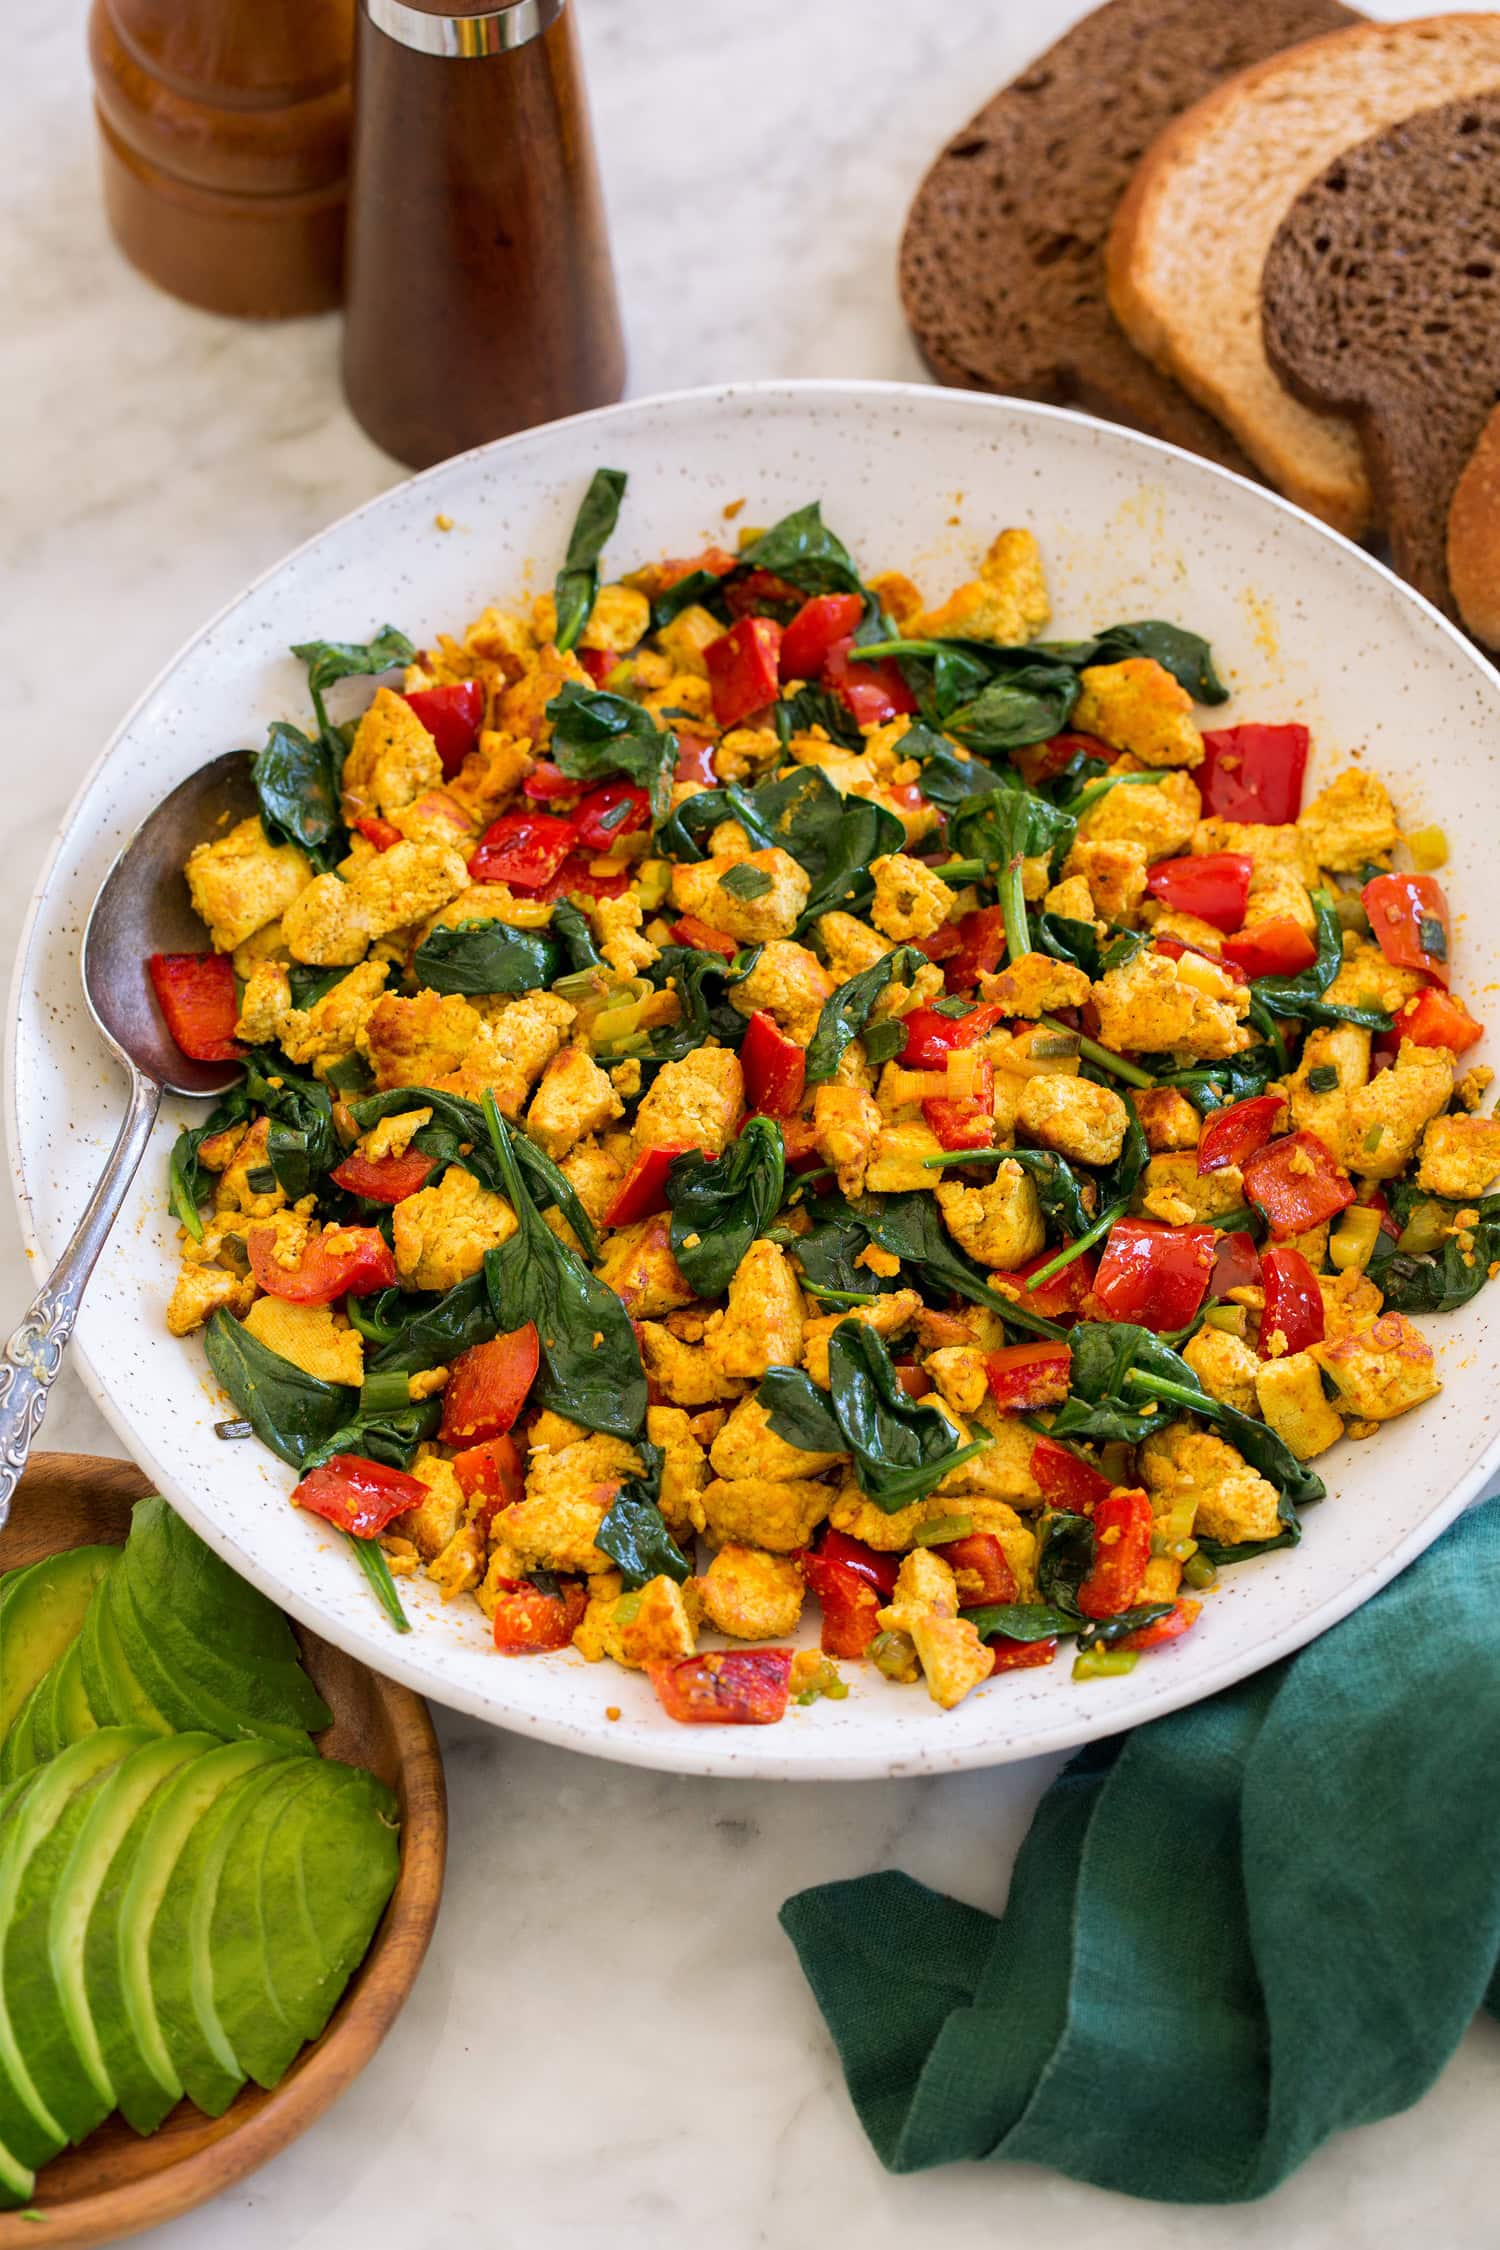 Tofu scramble in a white ceramic bowl over a marble surface with a green cloth to the side.